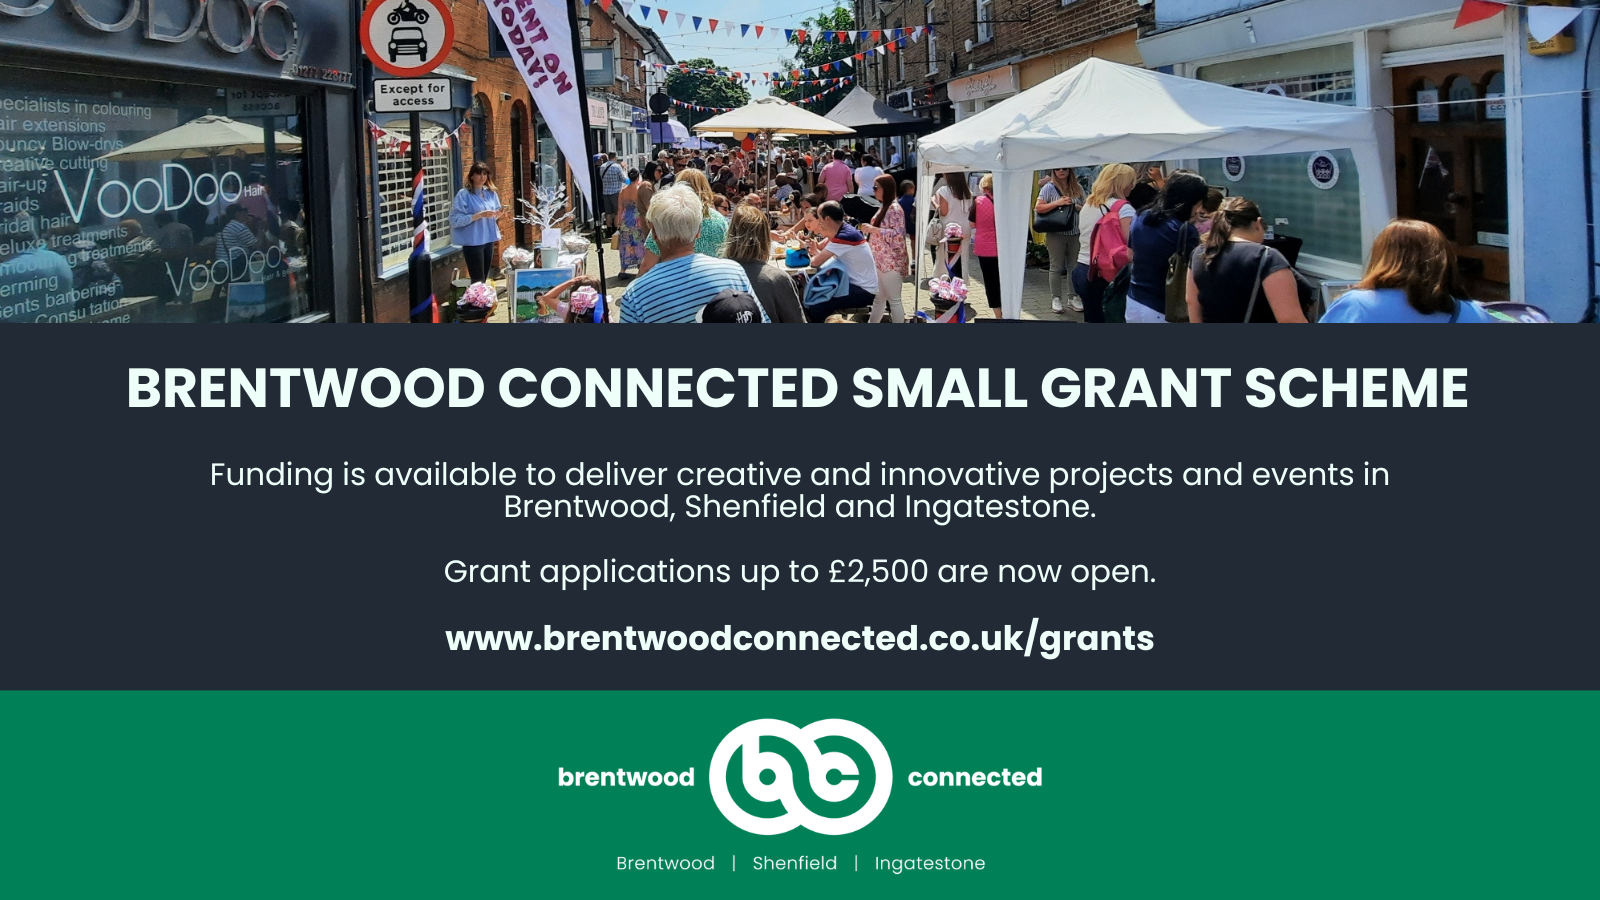 Brentwood Connected Small Grant Scheme poster